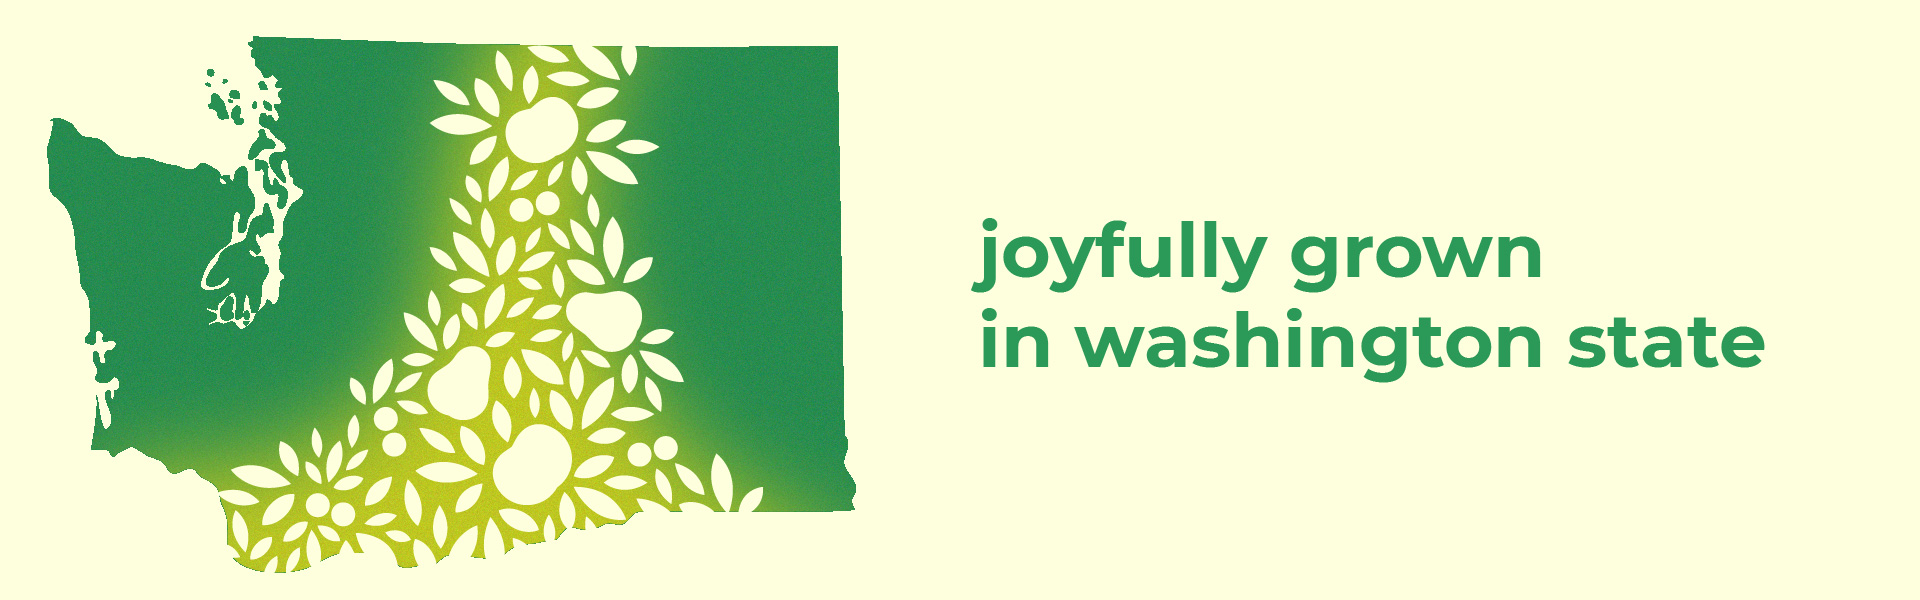 An Outline Of Washington State in Green with Outlines of Apples and Cherries in Light Yellow with Green Text to the Side that says Joyfully Grown in Washington State